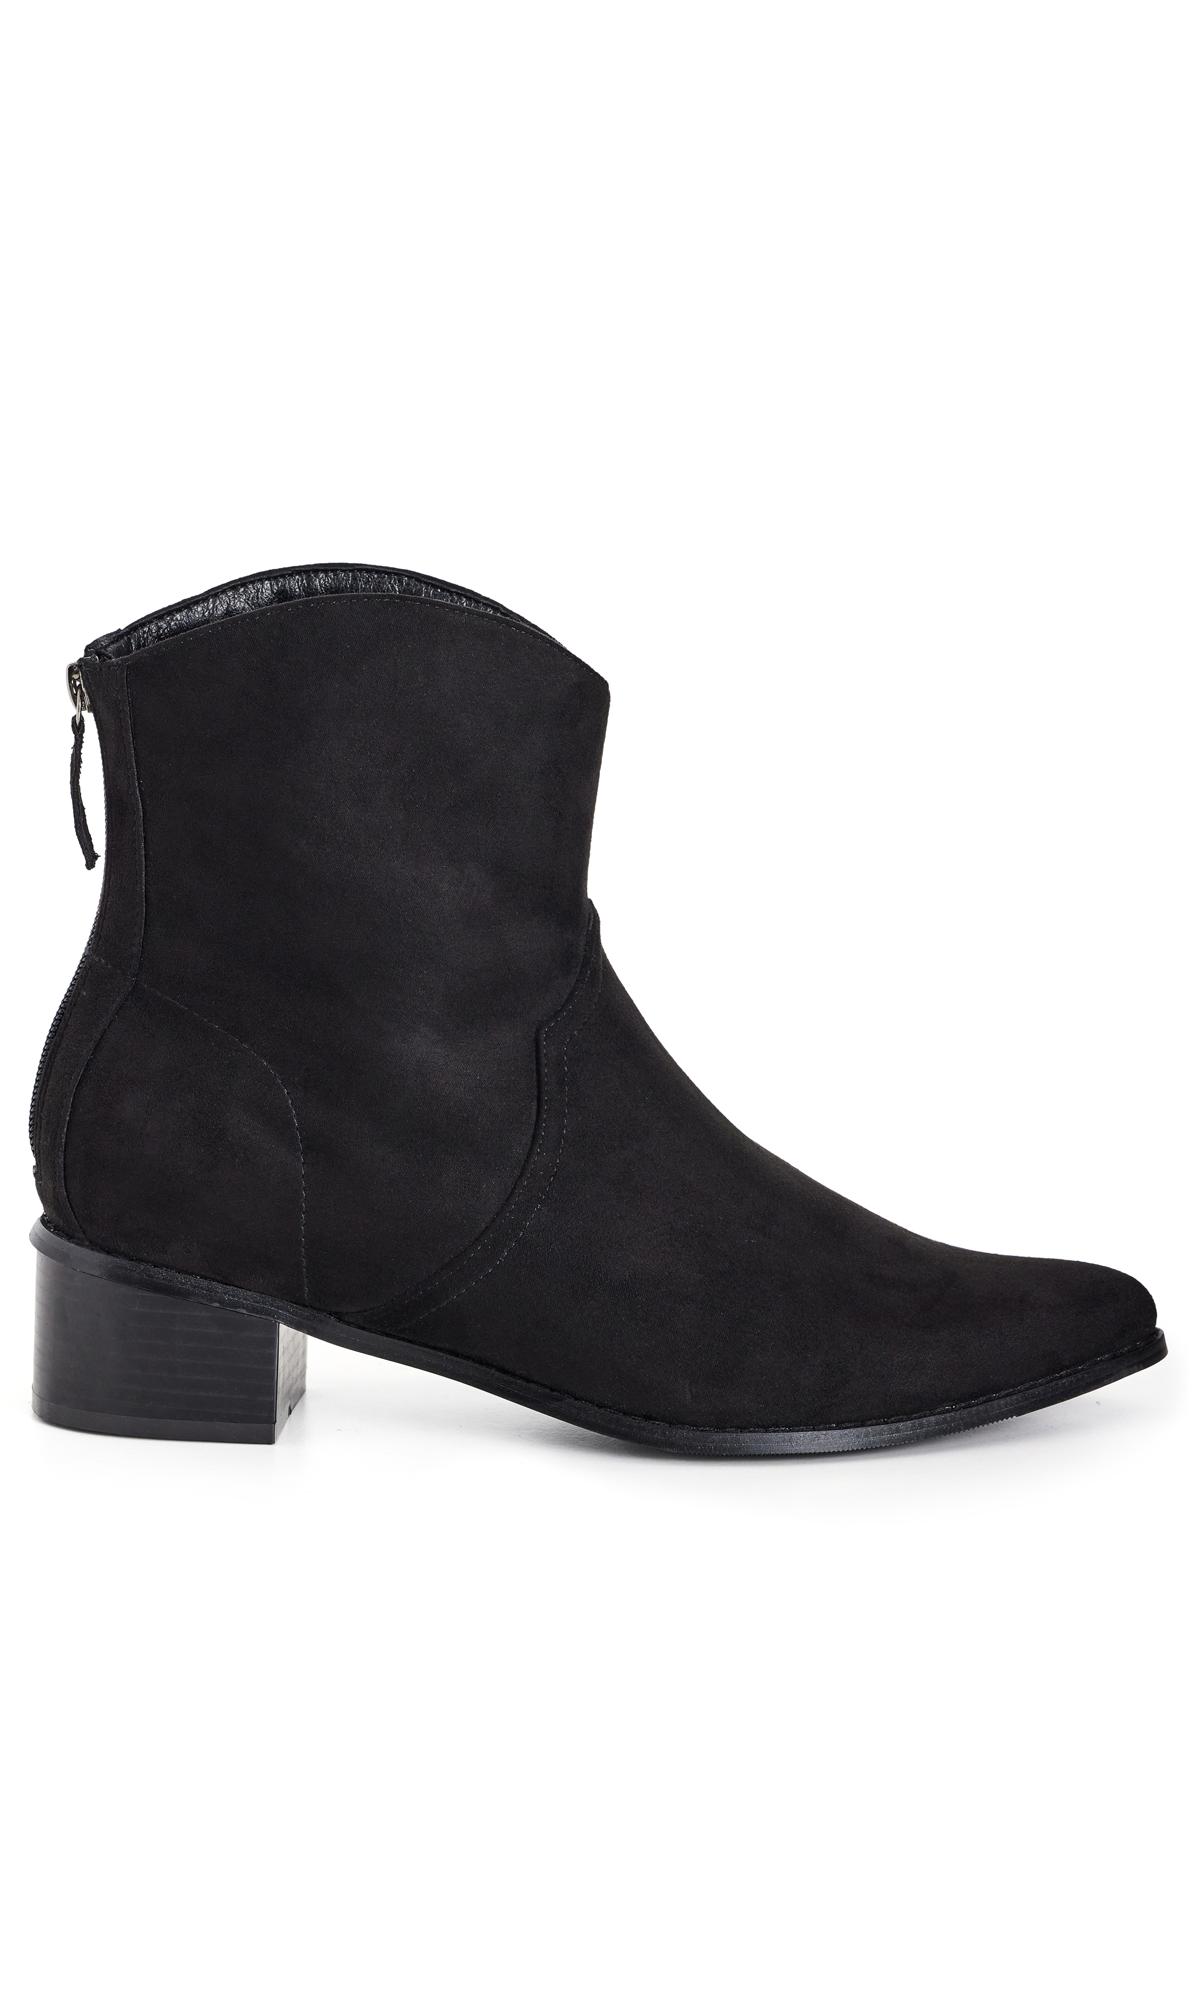 Western Black Ankle Boot 2